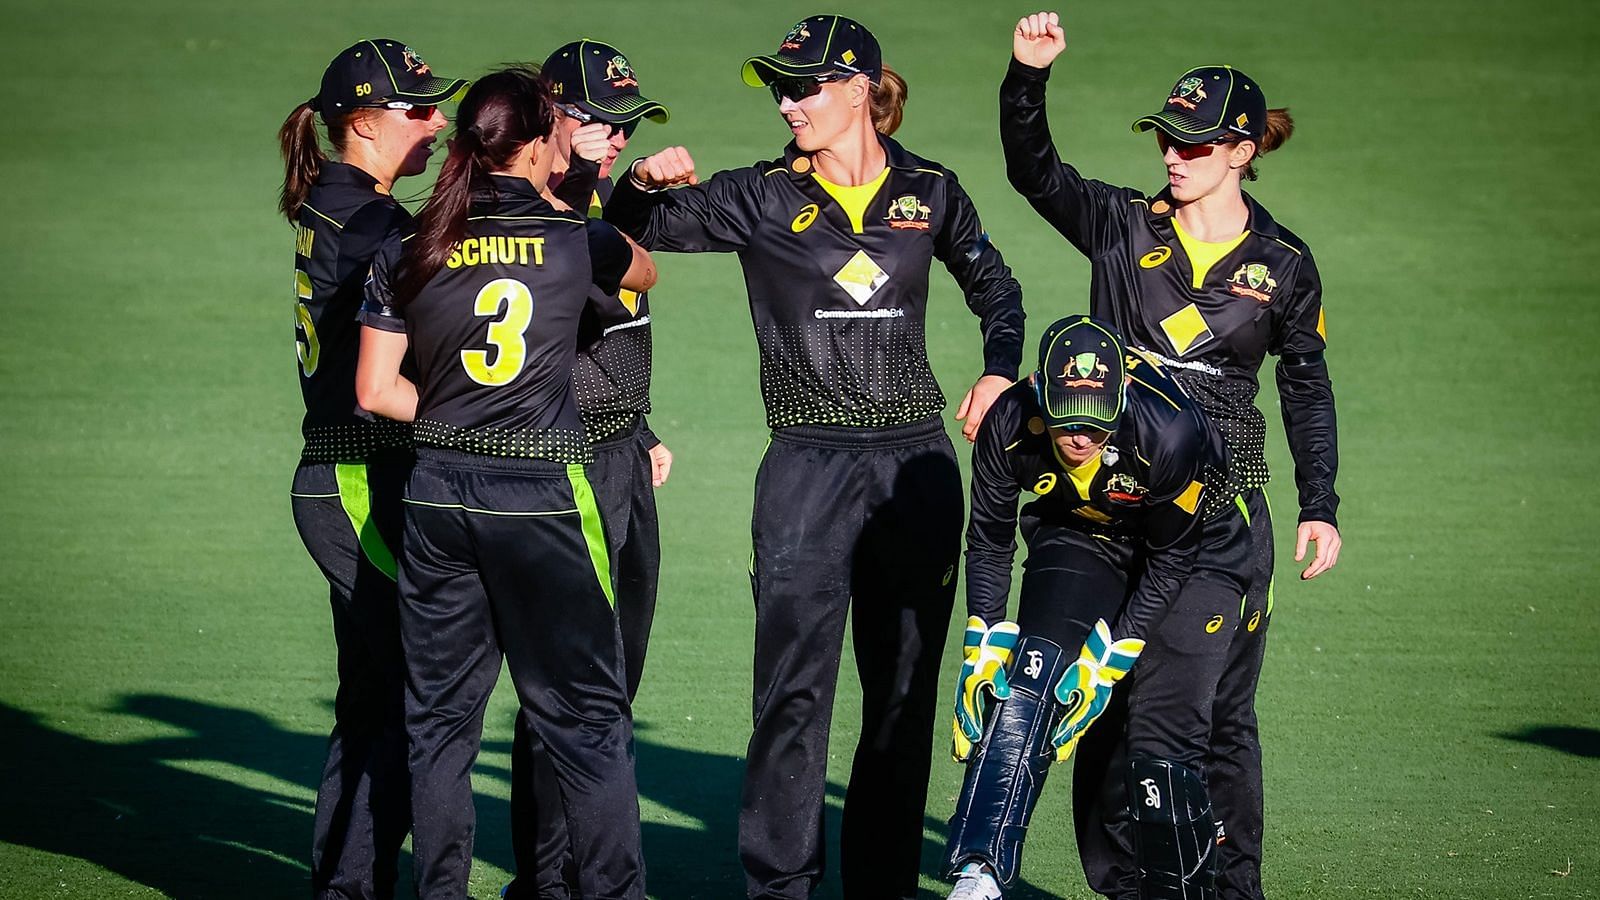 Australia fast bowler Megan Schutt took 4 wickets in her four overs as Australia won the first T20 against New Zealand by 17 runs